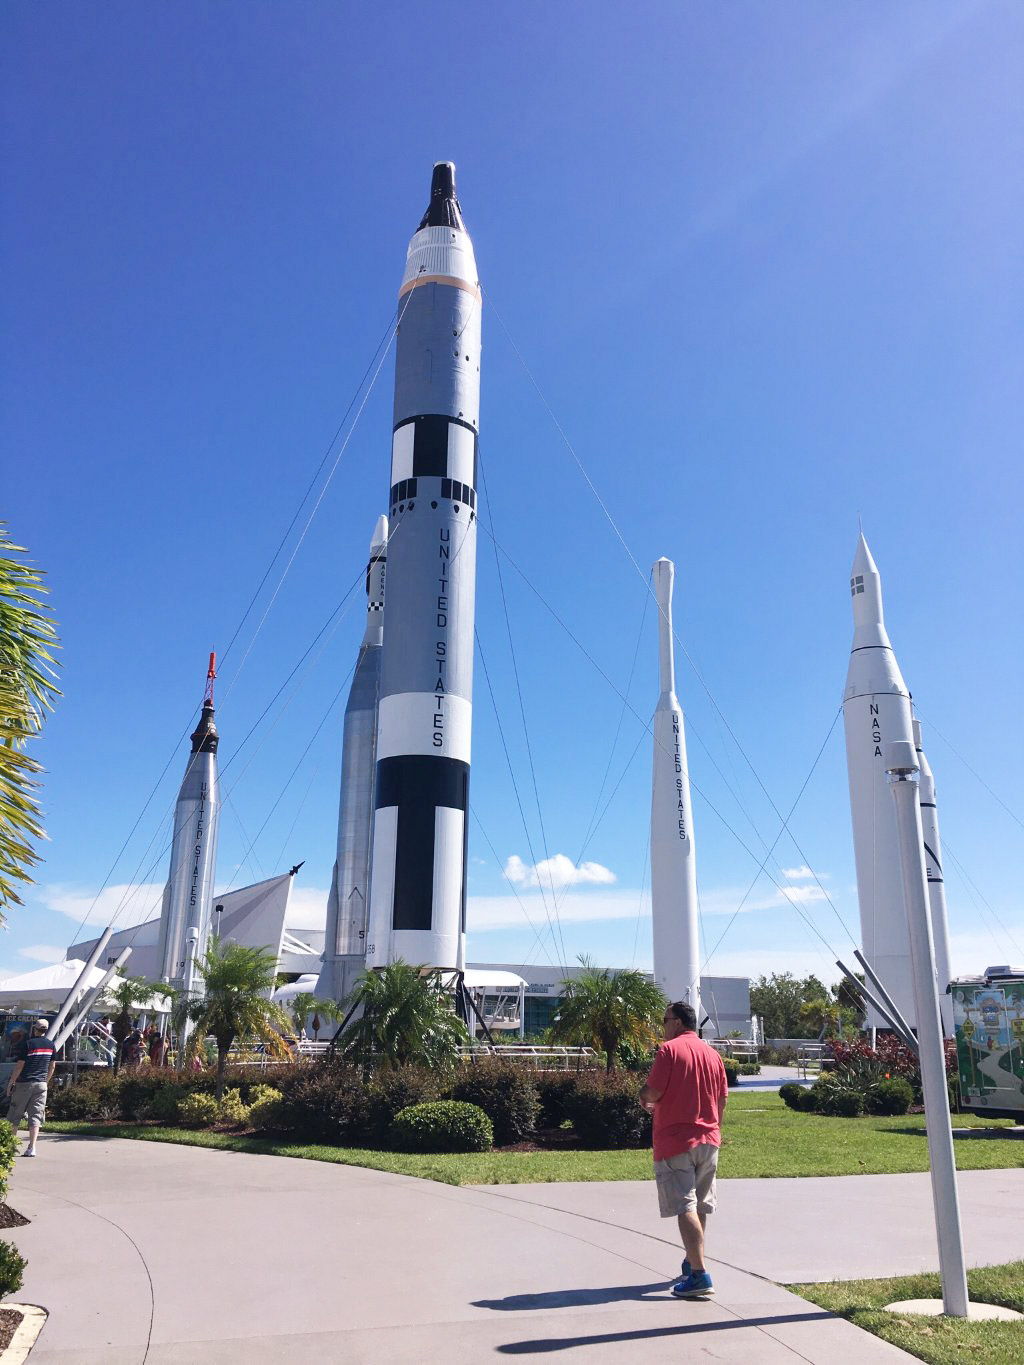 Great Day at the Space Center